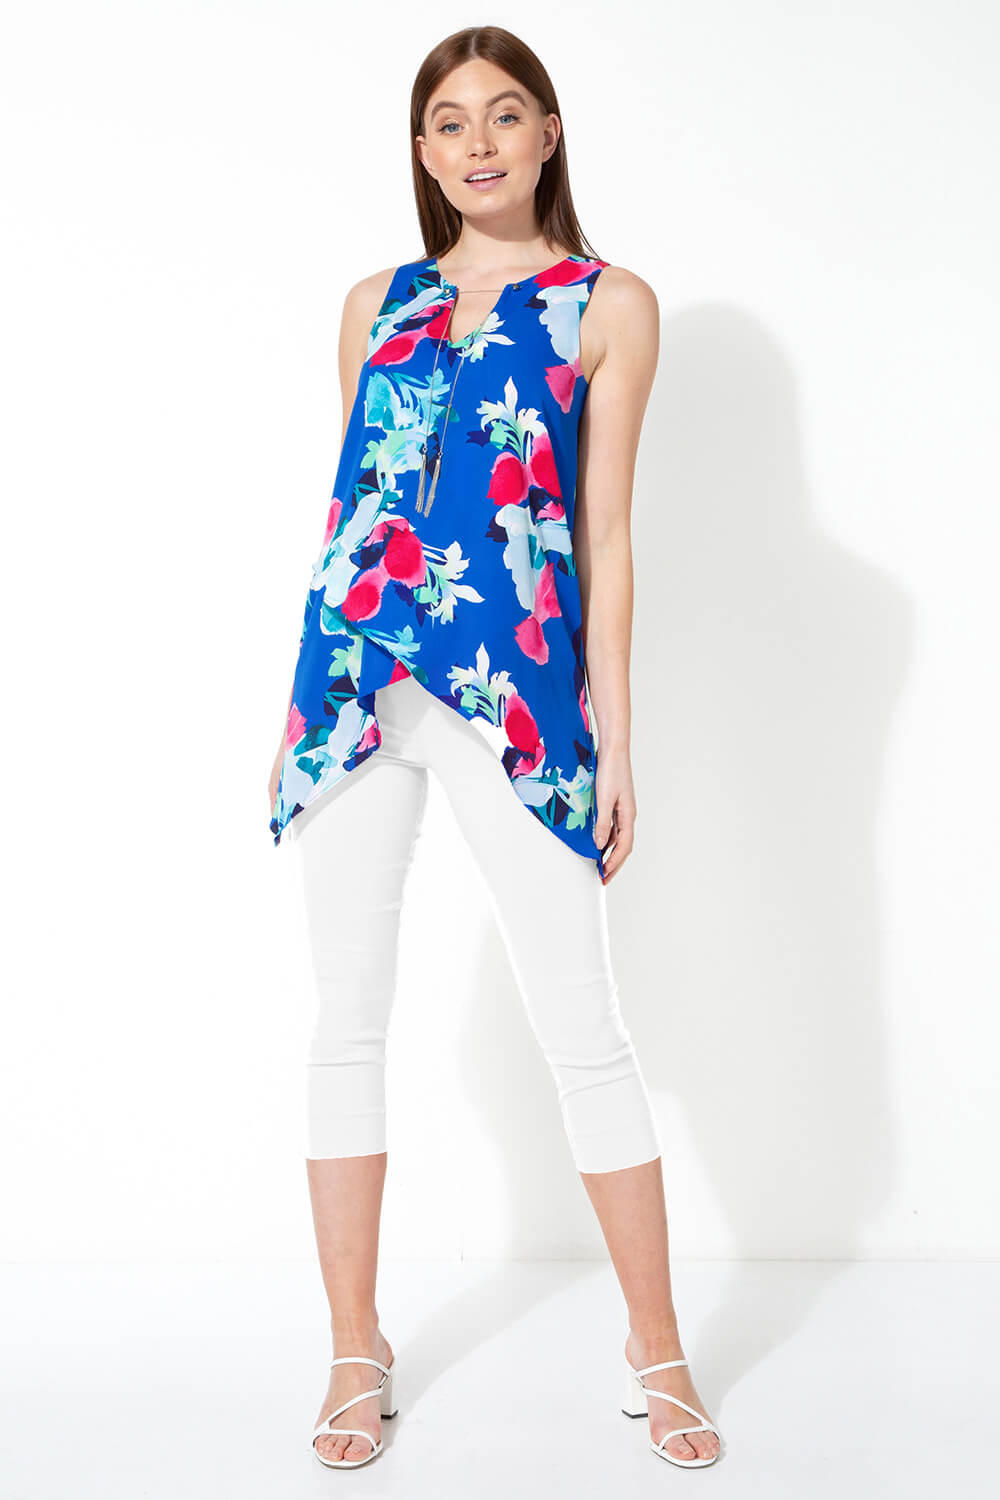 Royal Blue Floral Print Asymmetric Top with Necklace, Image 5 of 5